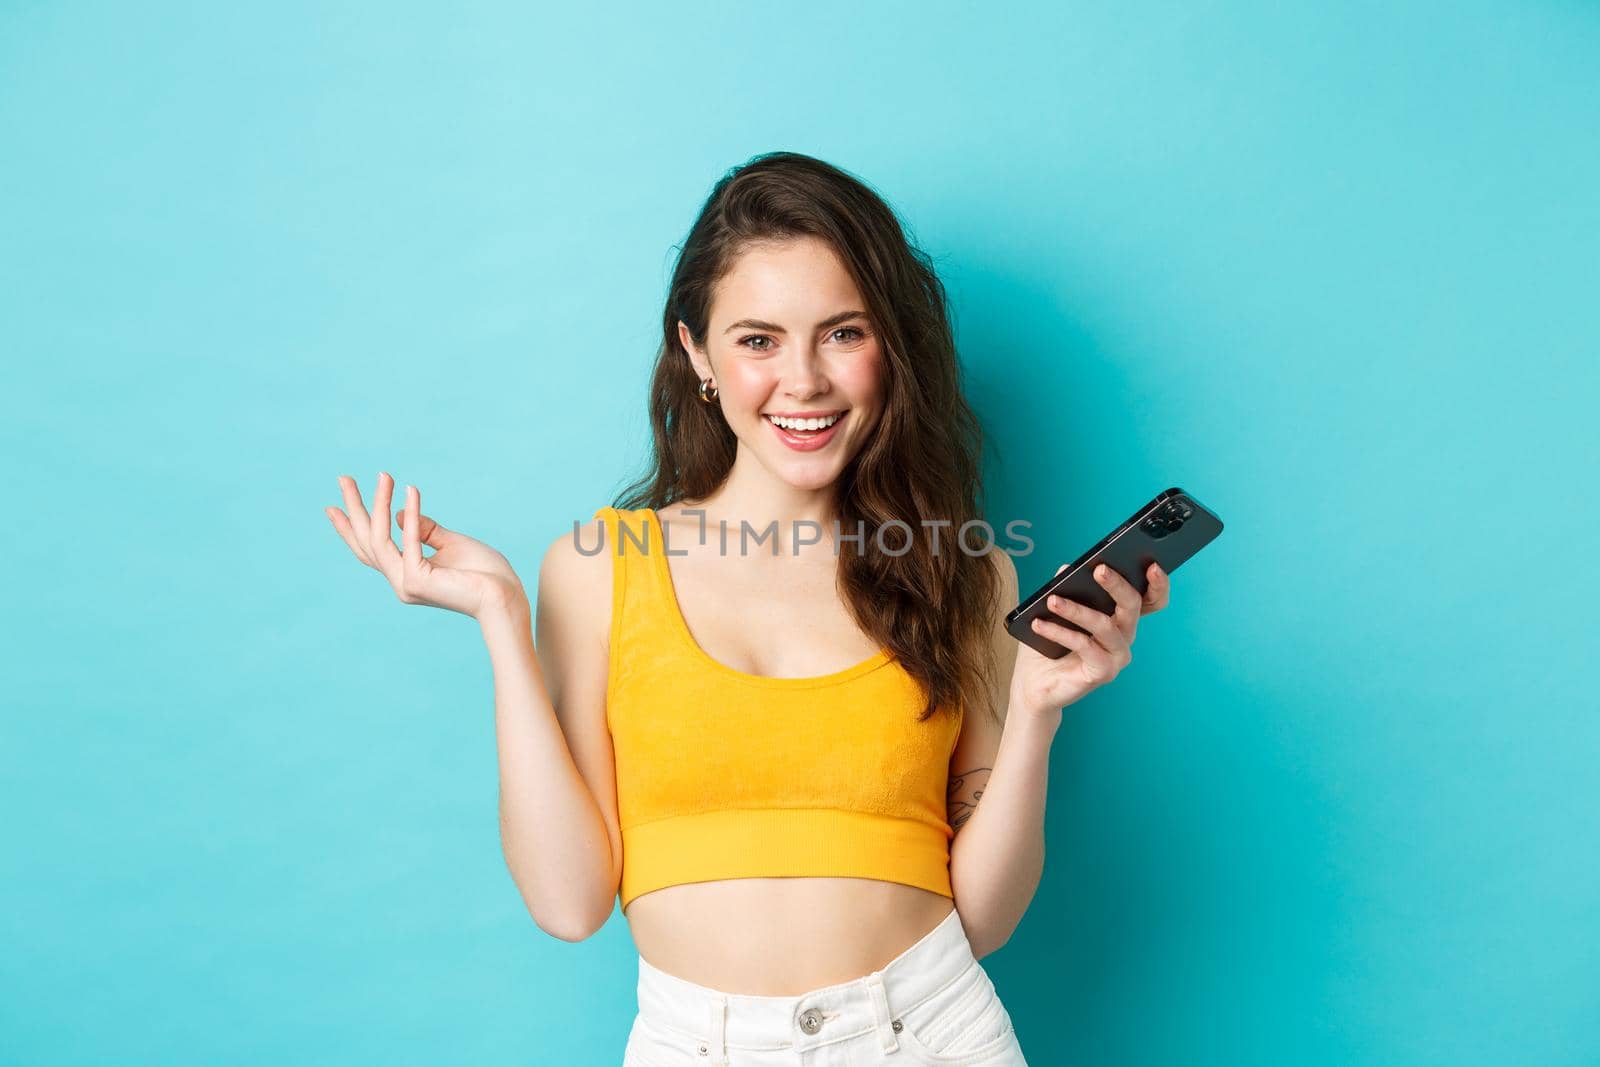 Stylish happy woman holding smartphone, laughing and smiling self-assured, chatting on mobile phone, standing over blue background.